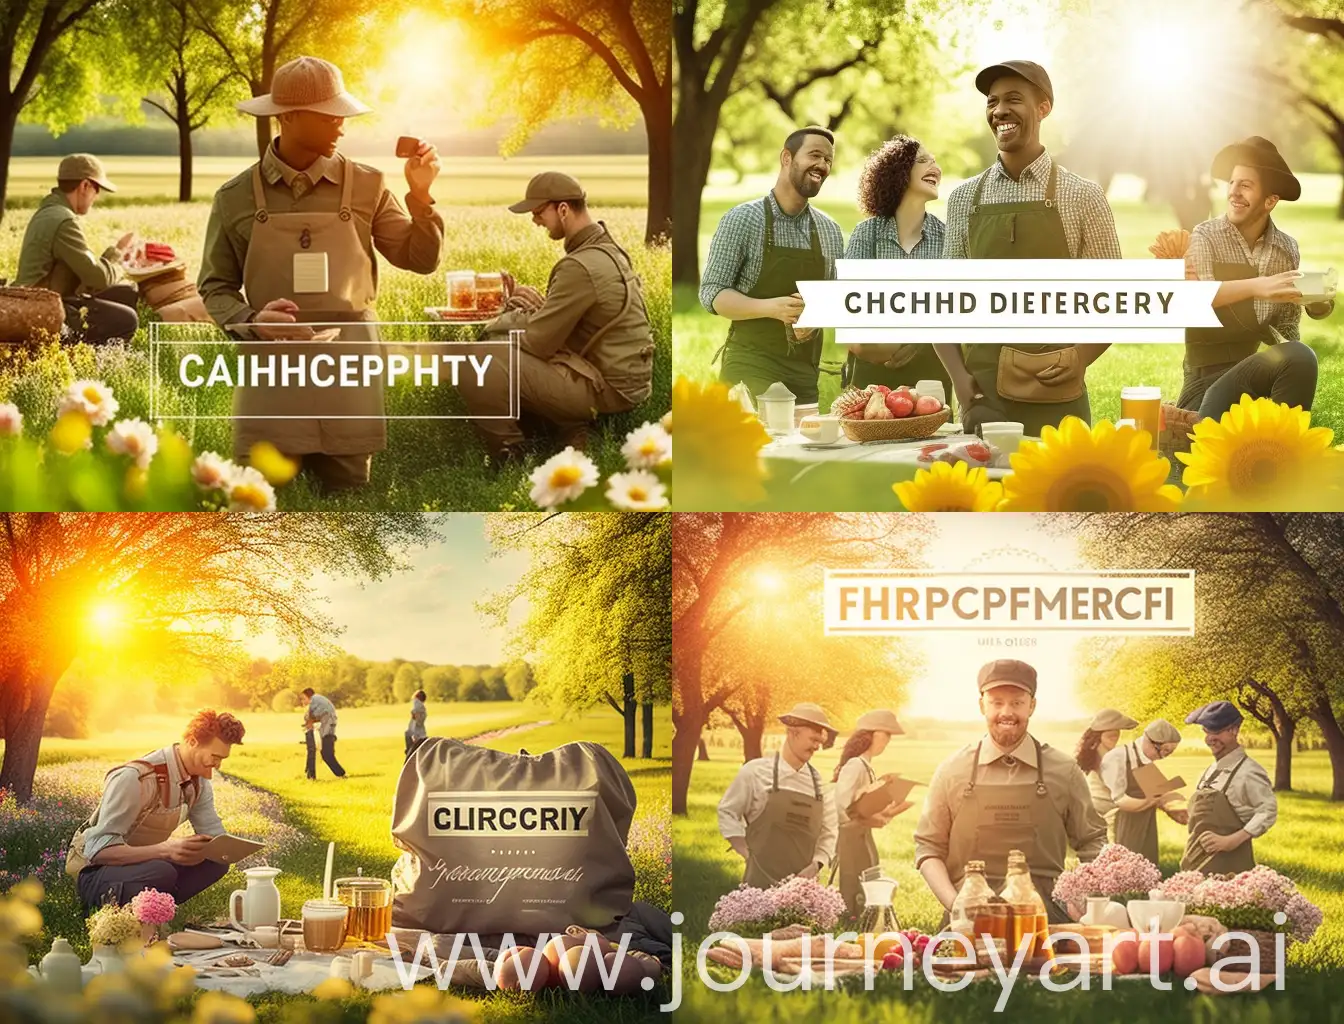 PHOTOGRAPHY ALCHEMY (Masterpiece, 8K, UHD, photo-realistic:1.3), diverse group of workers, dressed in work clothes, (warm smile:1.2), open field, lush green trees, (spring blossoms:1.1), picnic setup, decorative food parcels, late afternoon light, (golden sunbeams:1.2), cheerful atmosphere, togetherness, subtle badges of their trade specialties, bottom-up perspective, looking at viewer, bright colors, vibrant